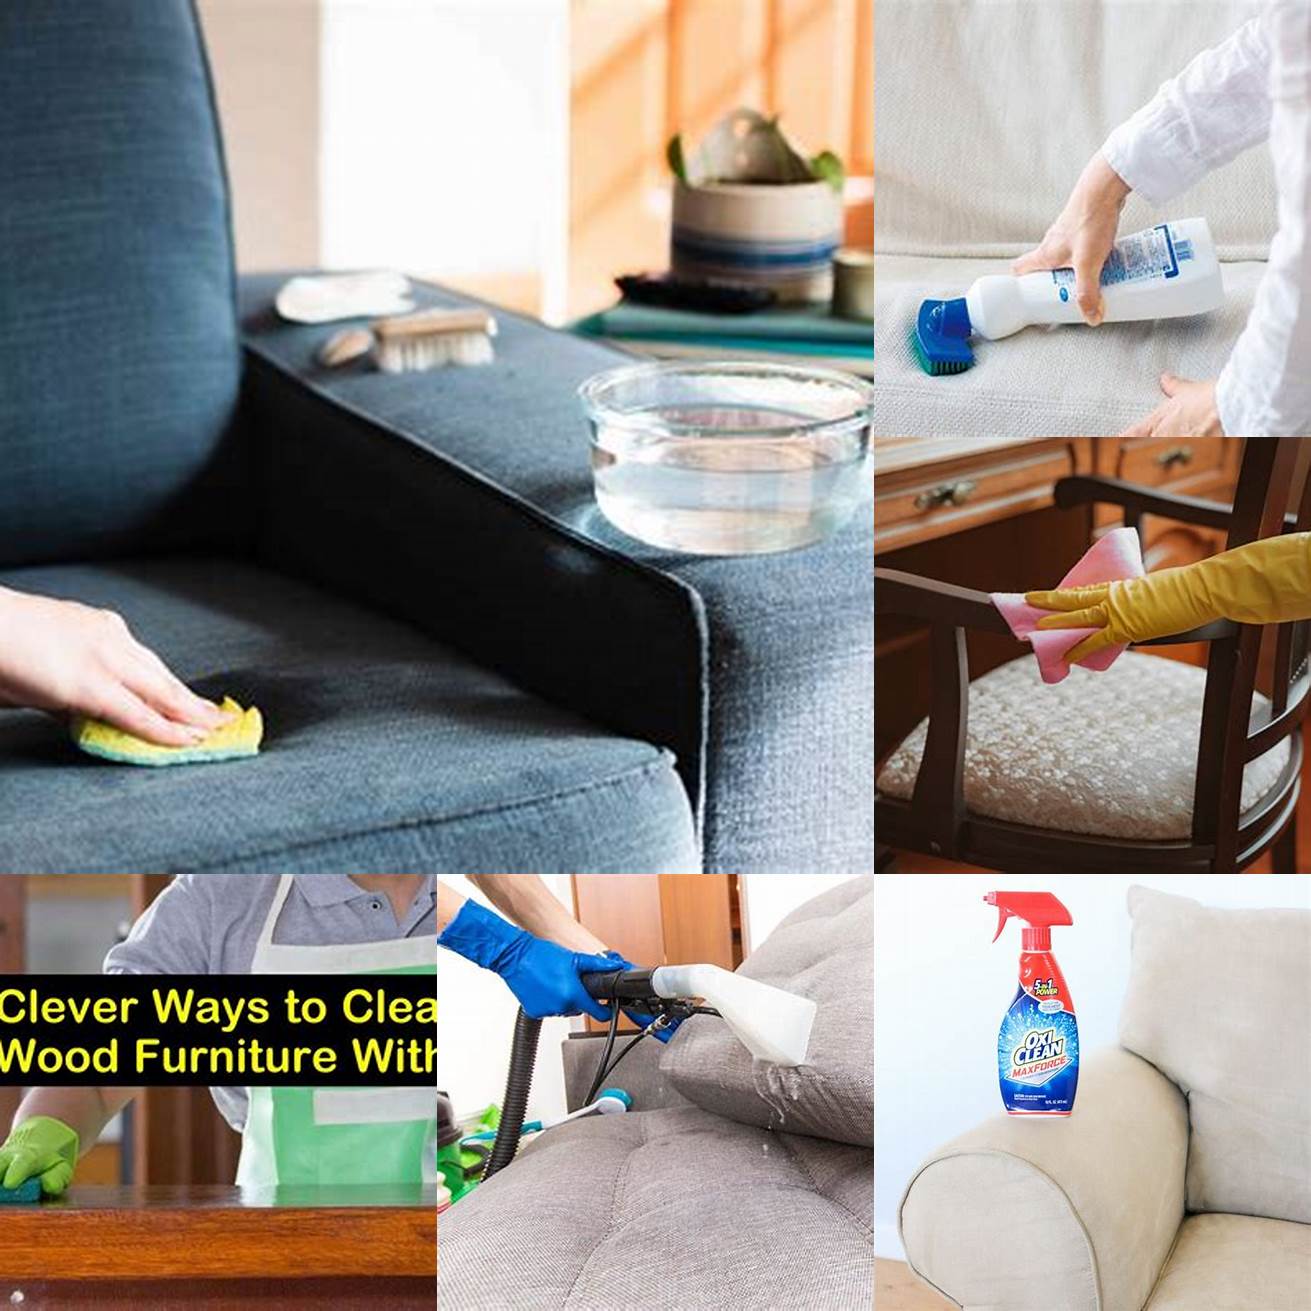 Alternative Cleaning Solutions